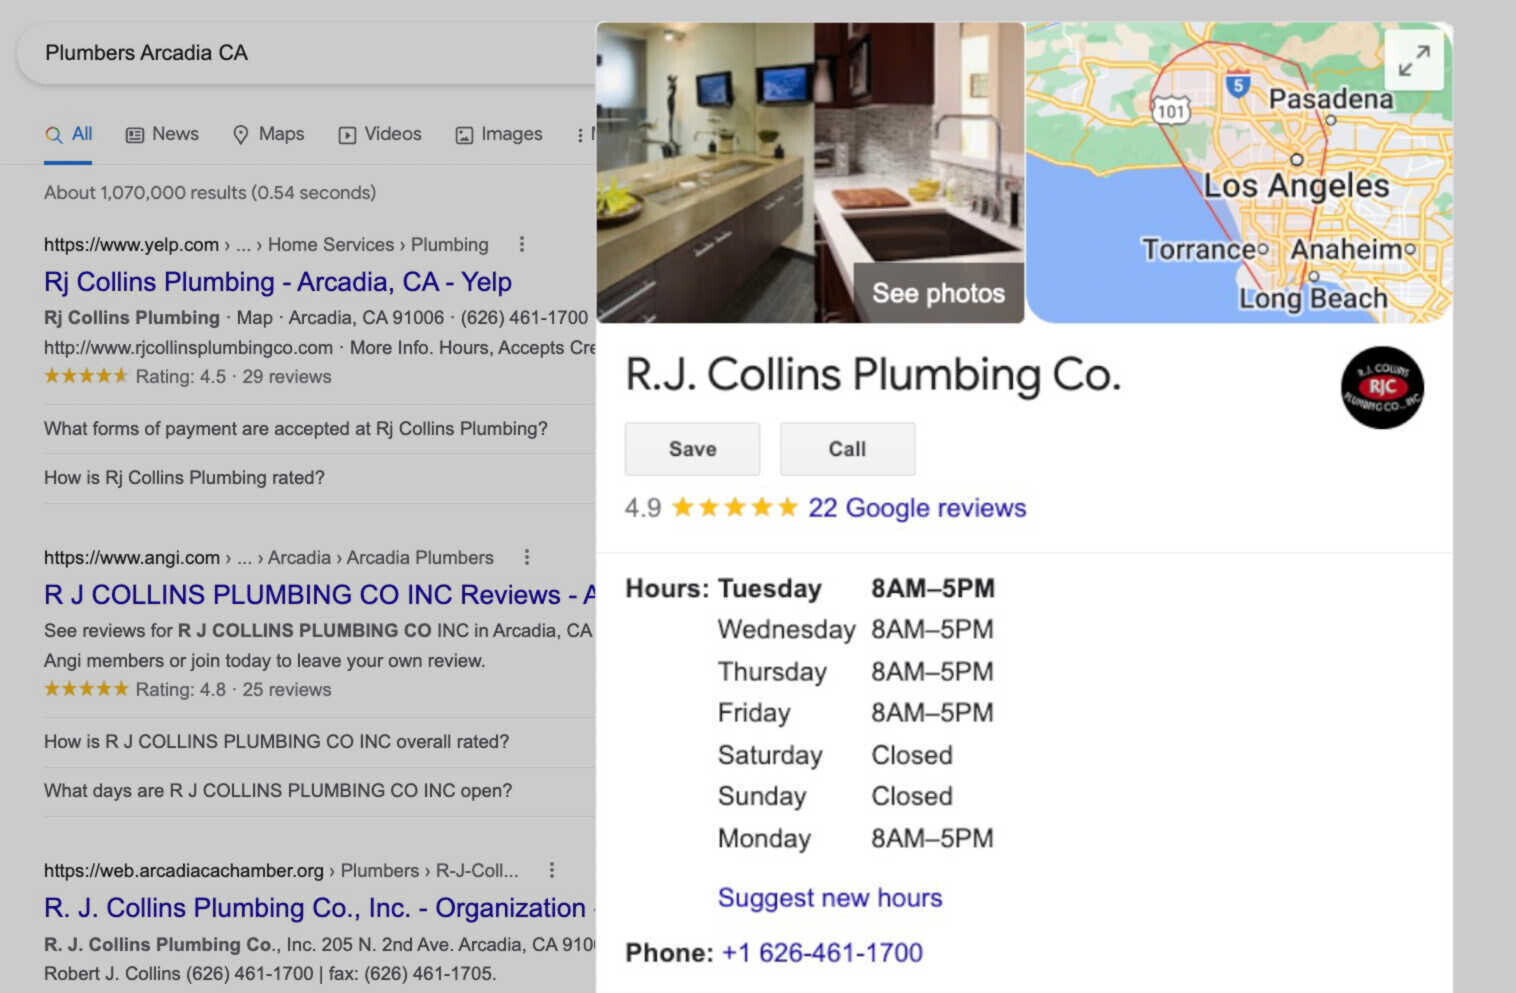 RJ Collins Plumbing Co. business hours